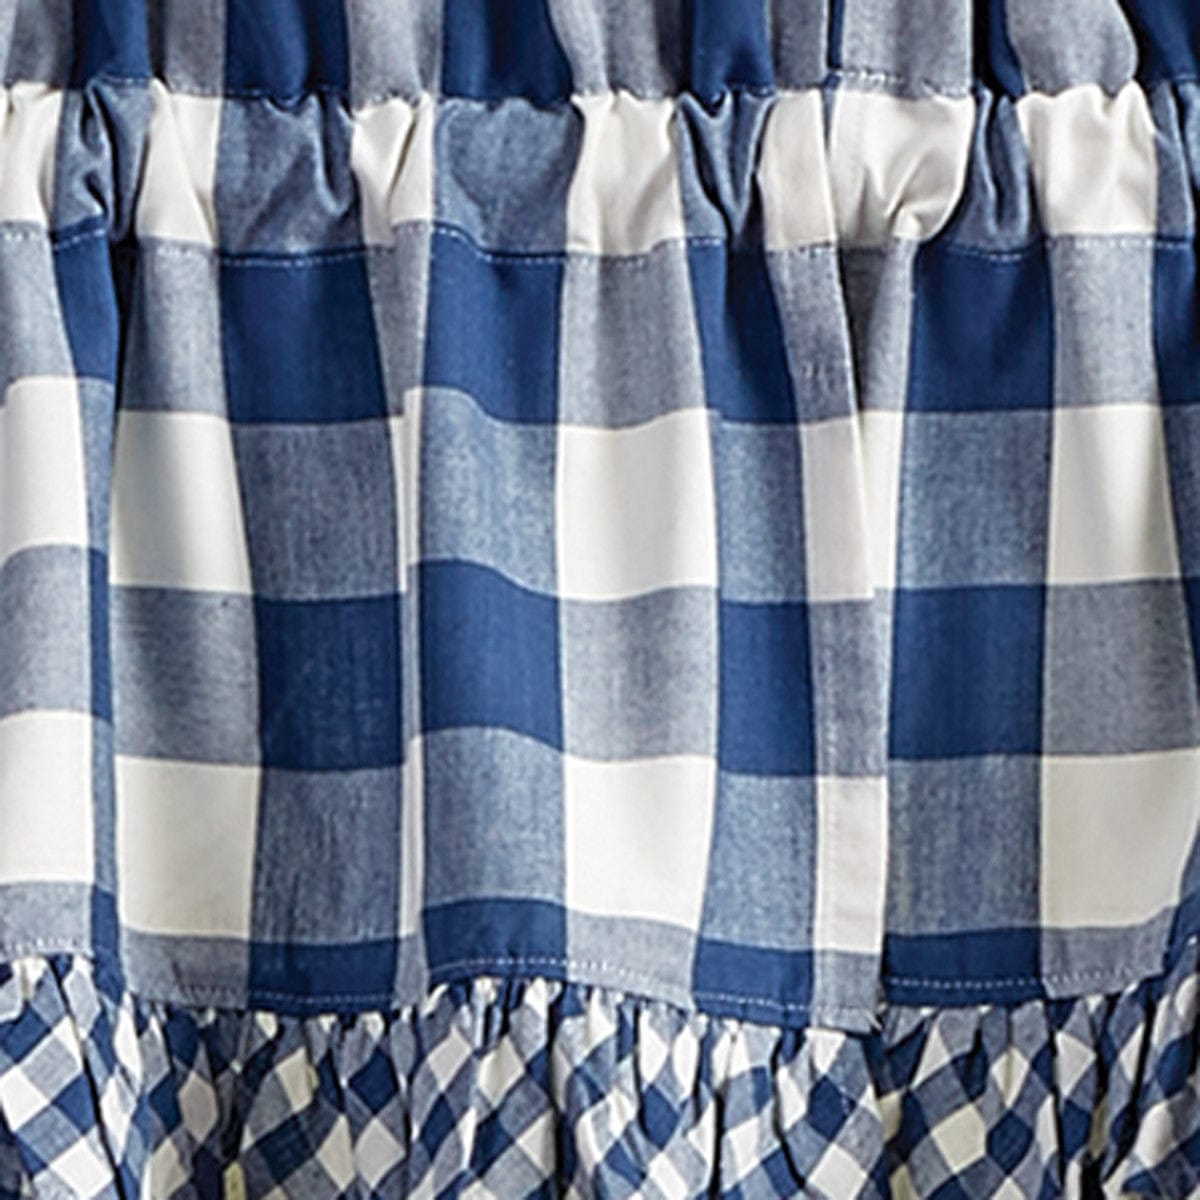 Wicklow Check in China Blue Ruffled Swag Pair 36&quot; Long Unlined-Park Designs-The Village Merchant